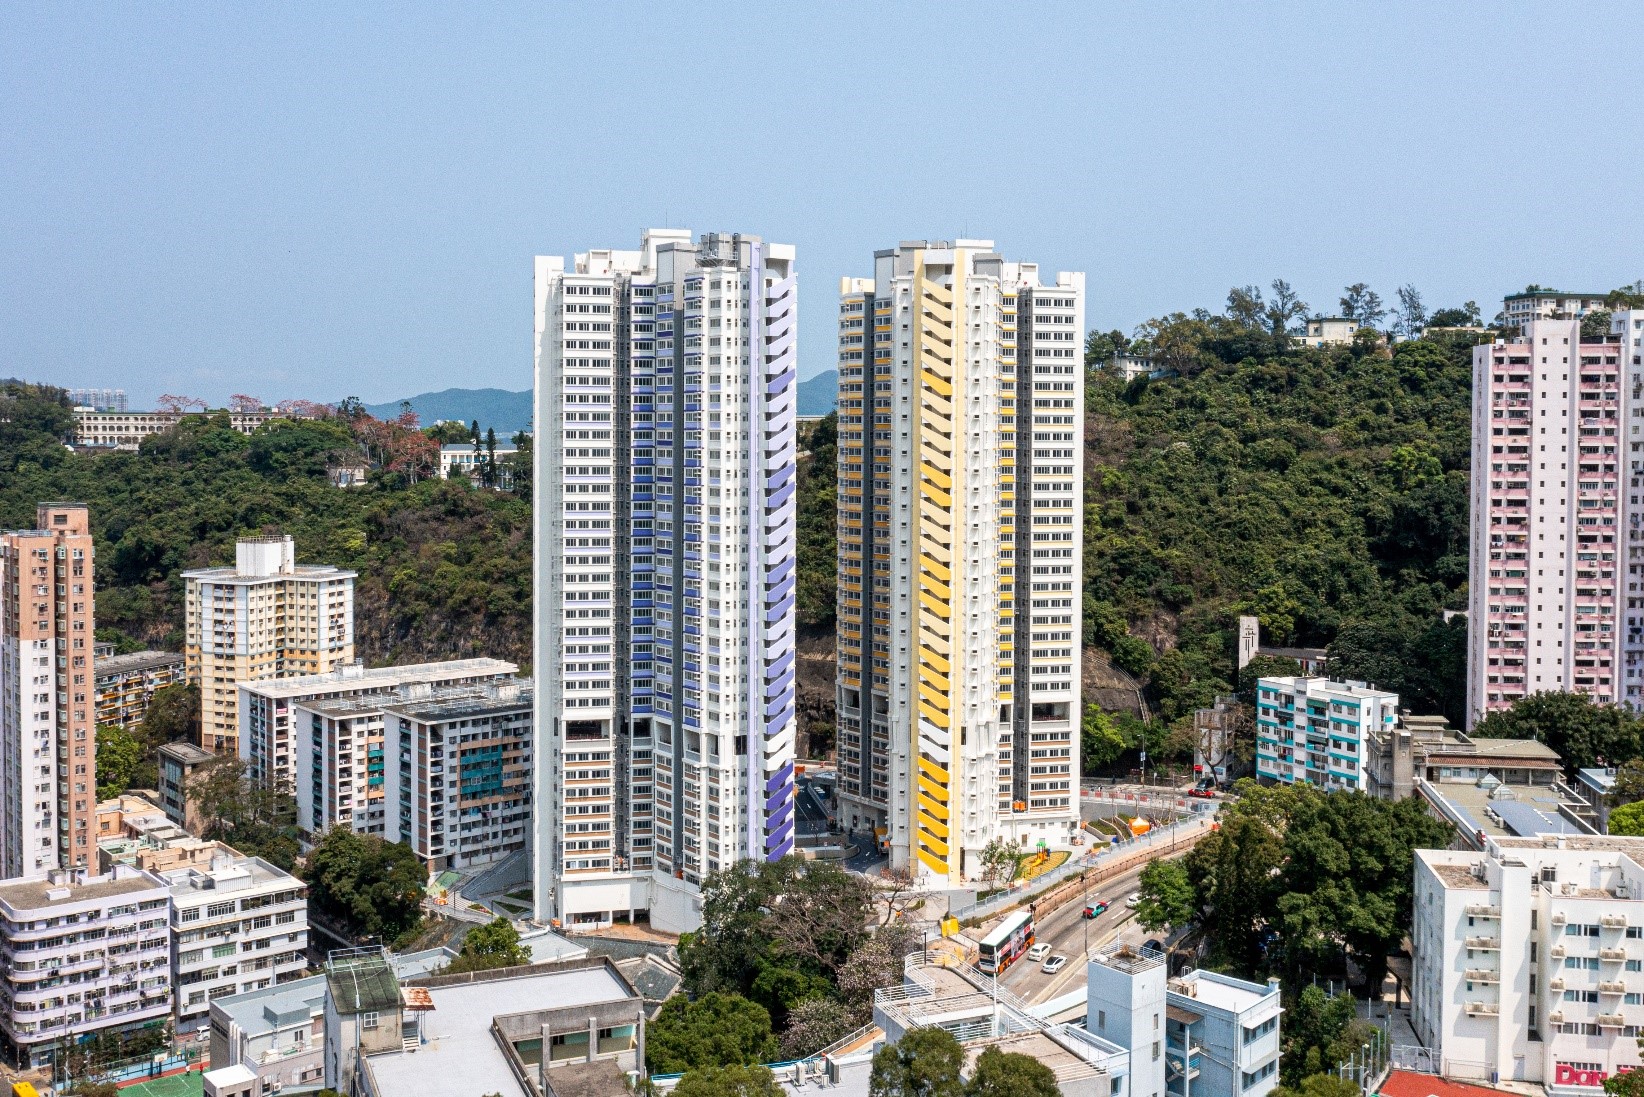 Ming Wah Dai Ha Redevelopment (Phase 1) was completed, providing over 960 rental units